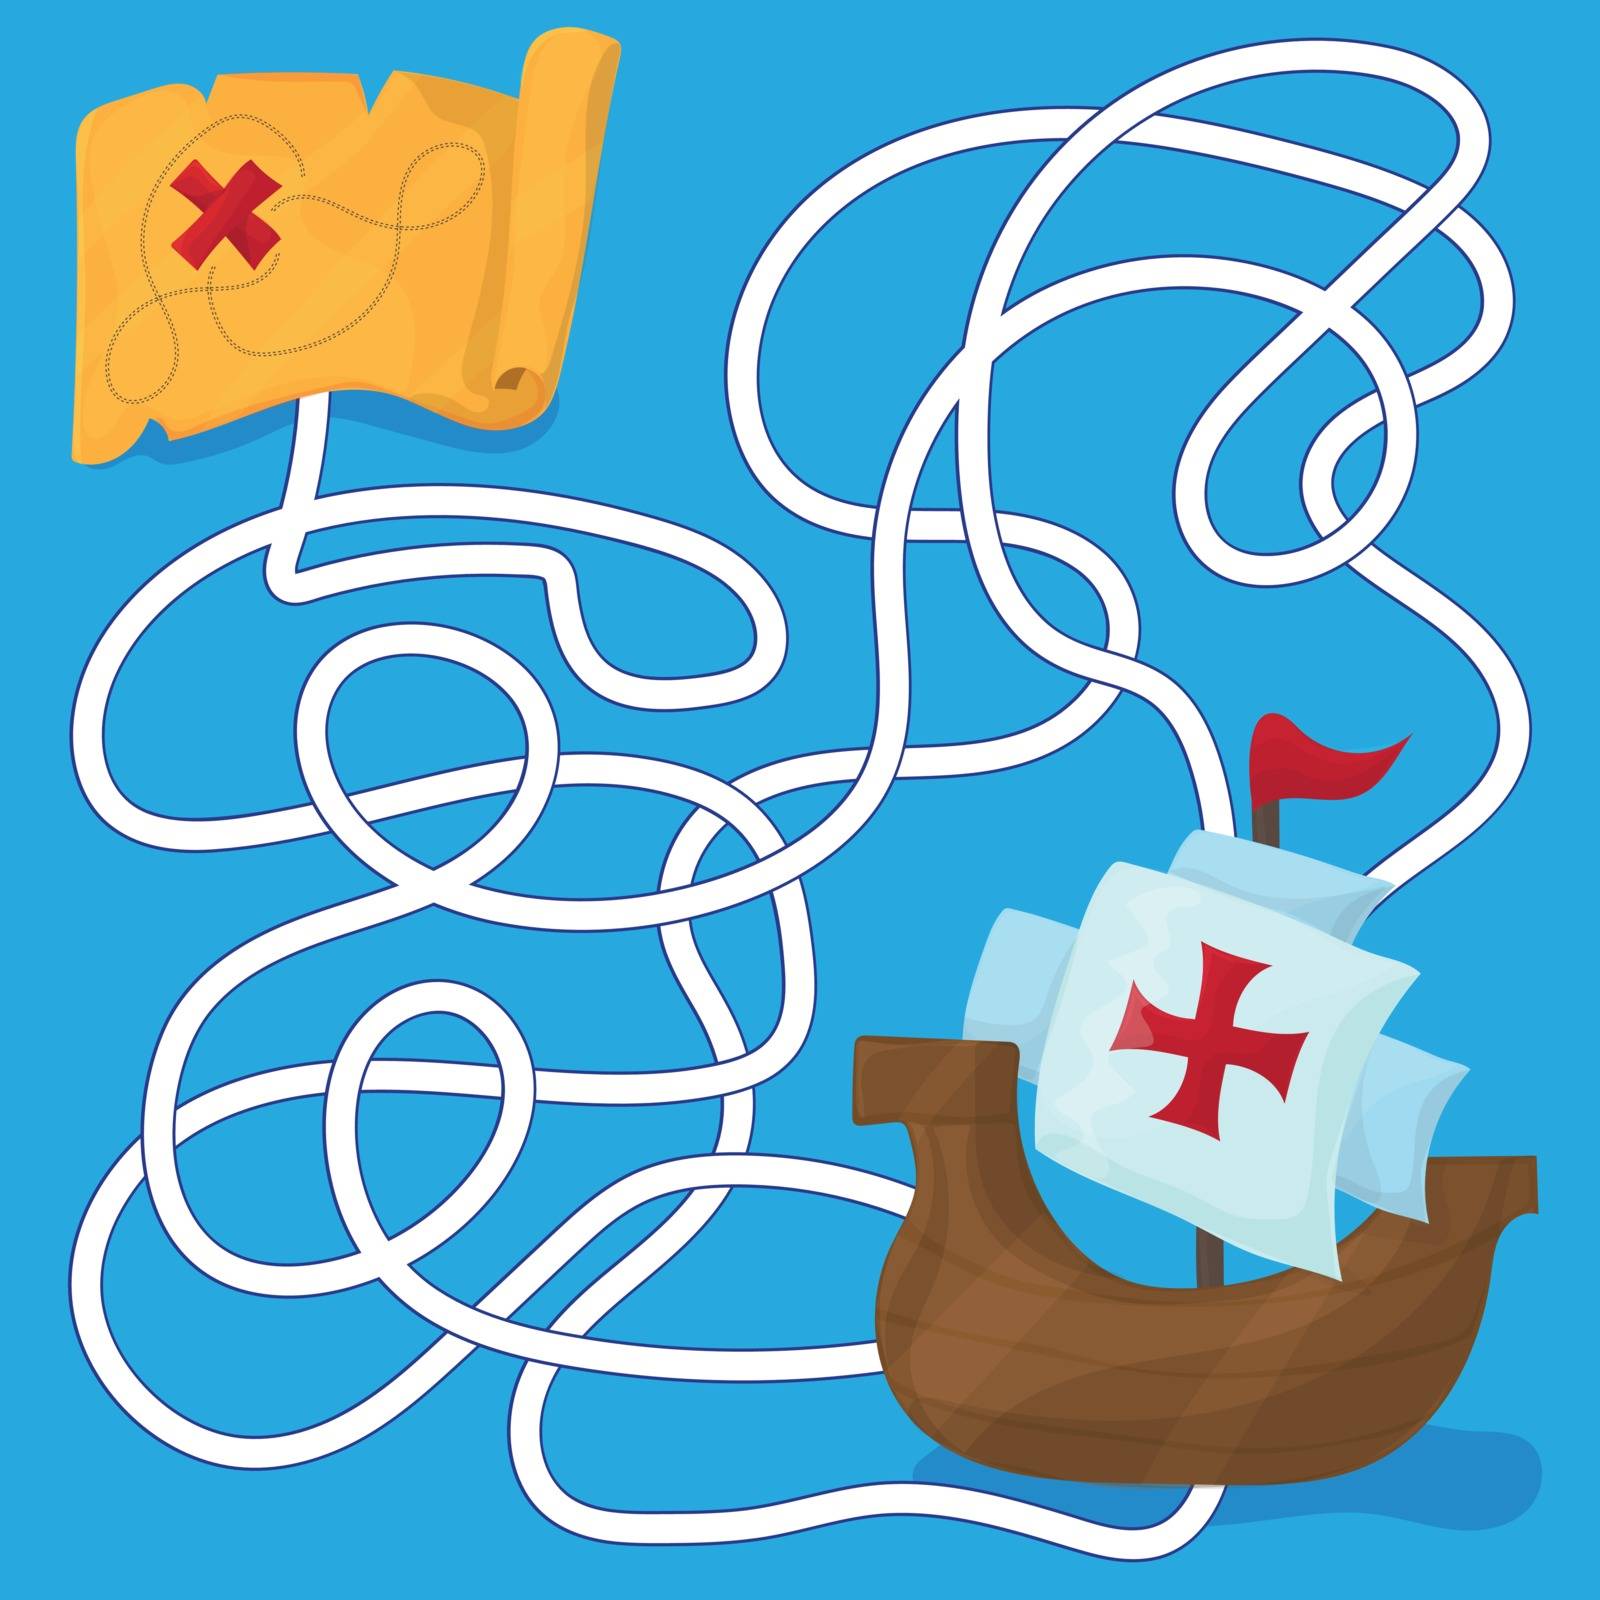 Maze in cartoon style. The ships of Christopher Columbus. Children s game labyrinth. Kids puzzle. Vector illustration